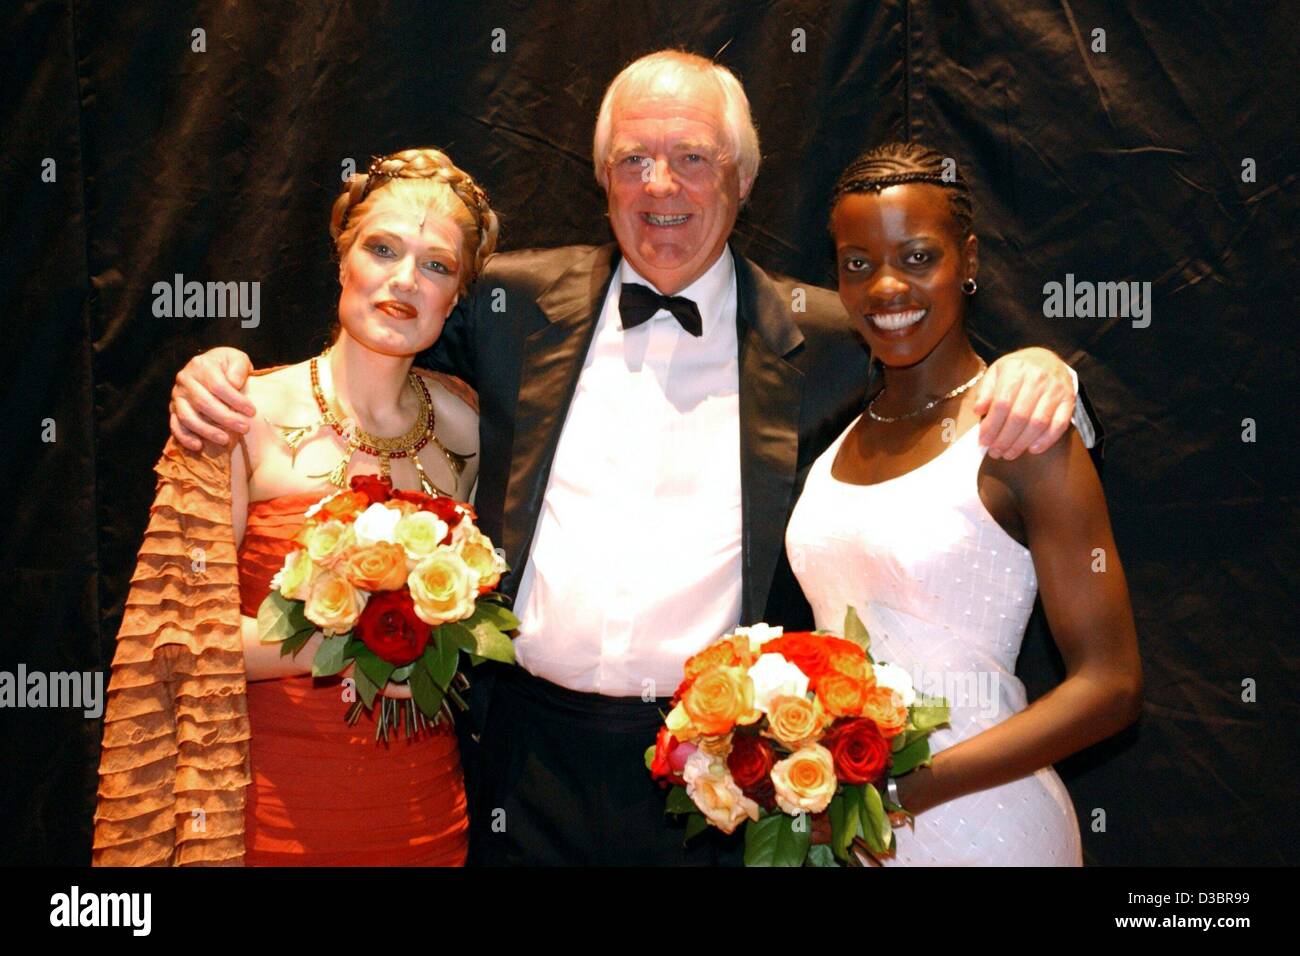 (dpa) - Tim Rice, who wrote the original English lyrics of the musical 'Aida', poses with the two German leading ladies, Florence Kasumba (R, Aida) and Maricel (Amneris), ahead of the German premiere of Elton John & Tim Rice's musical version of 'Aida' in Essen, Germany, 5 October 2003. More than 10 Stock Photo